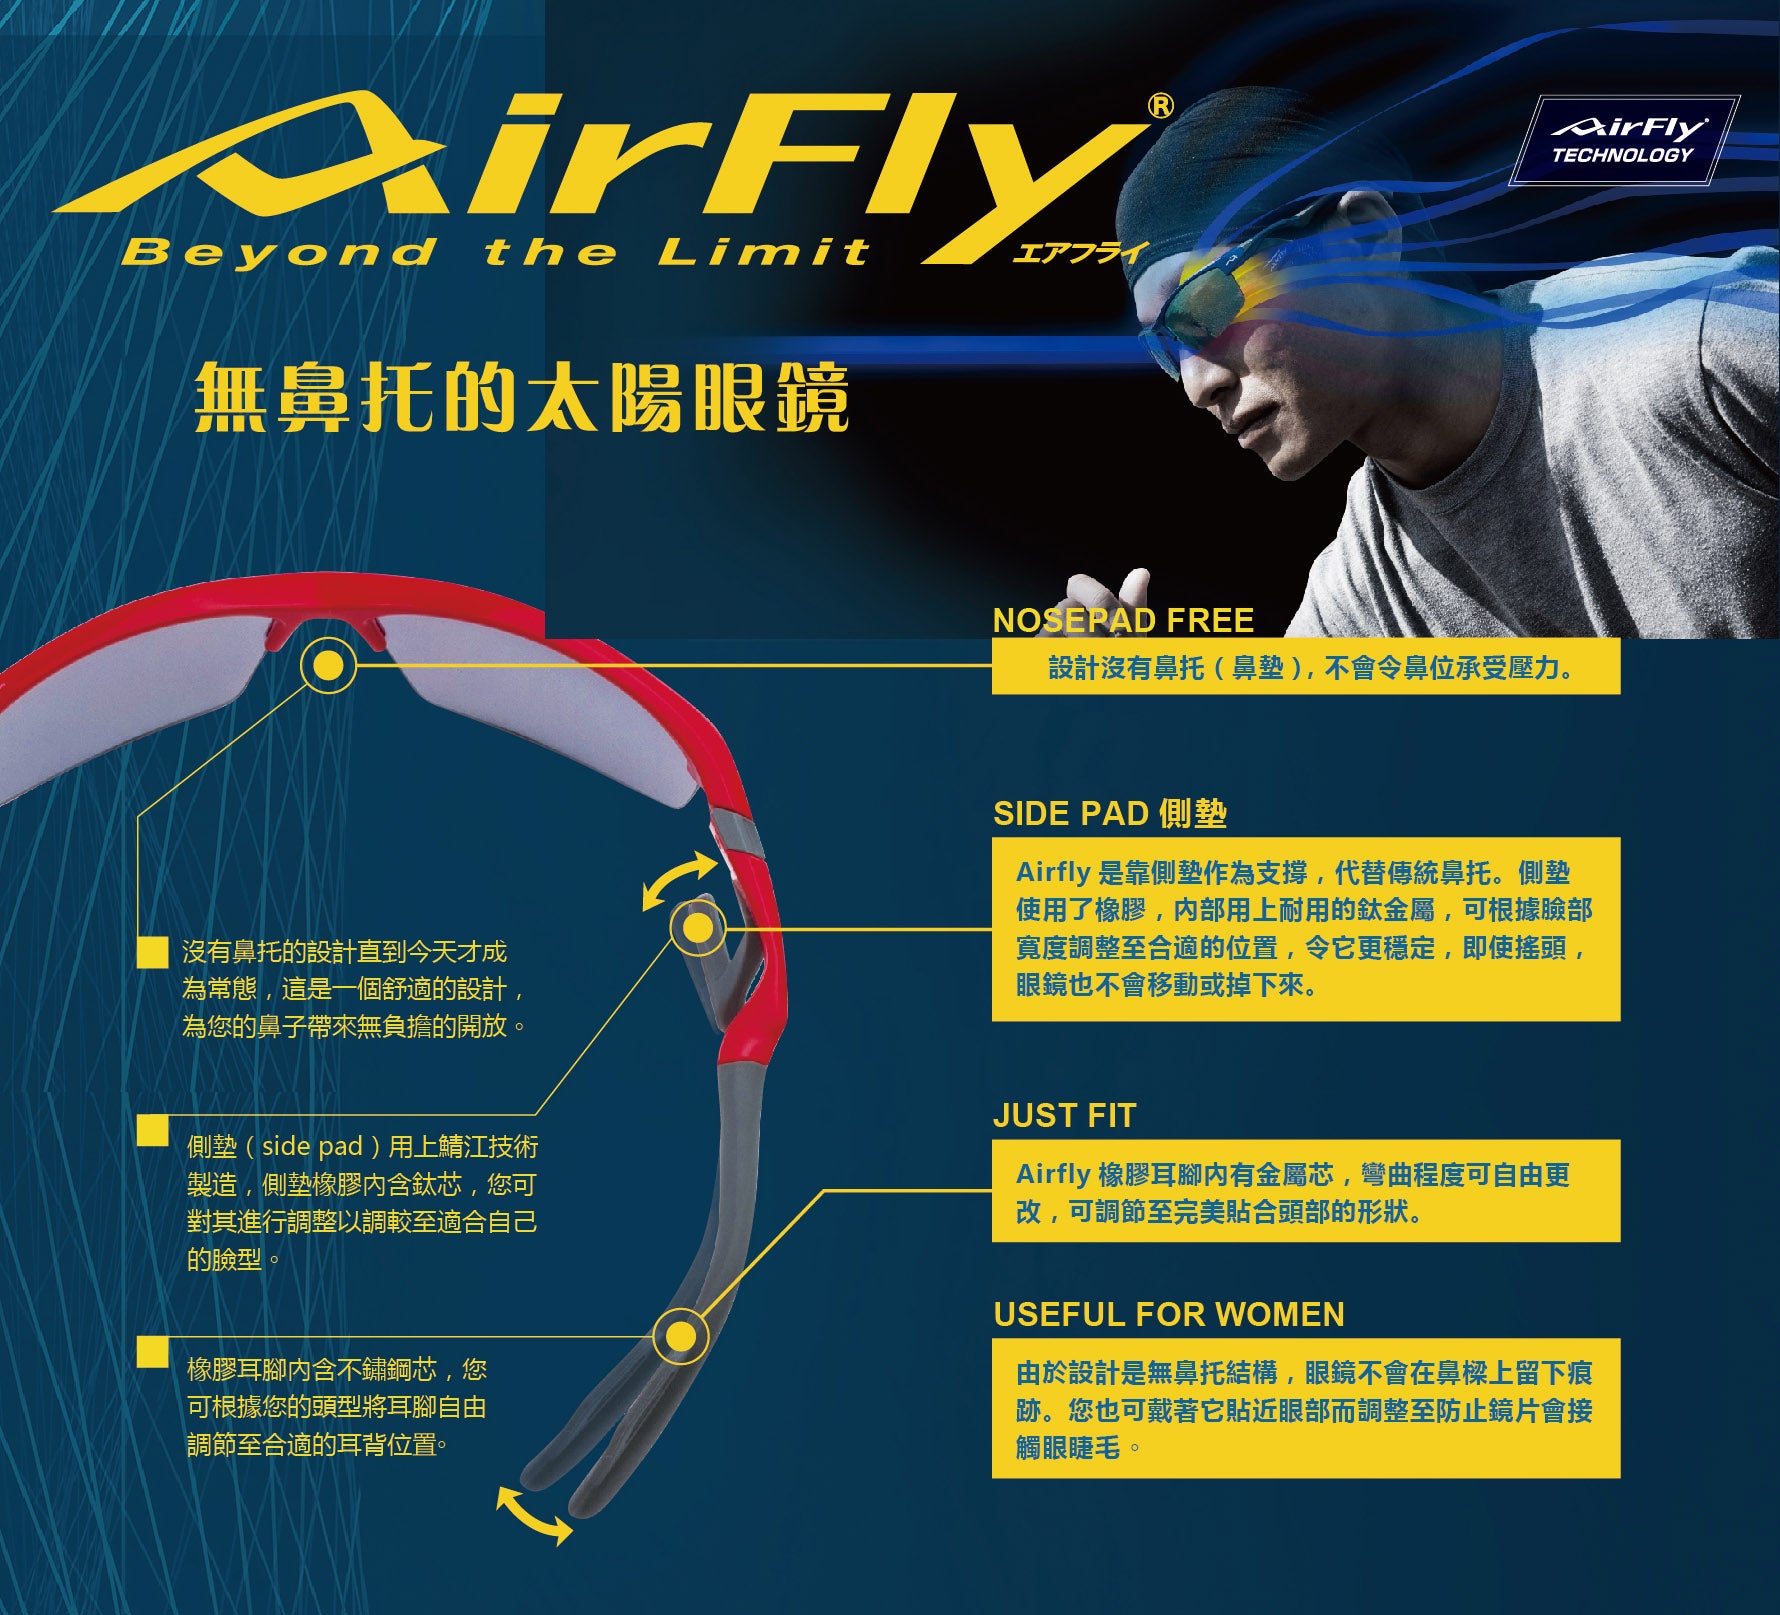 AirFly - AF303 C3(Photochromic Gray Lens)【Pre-order Now】